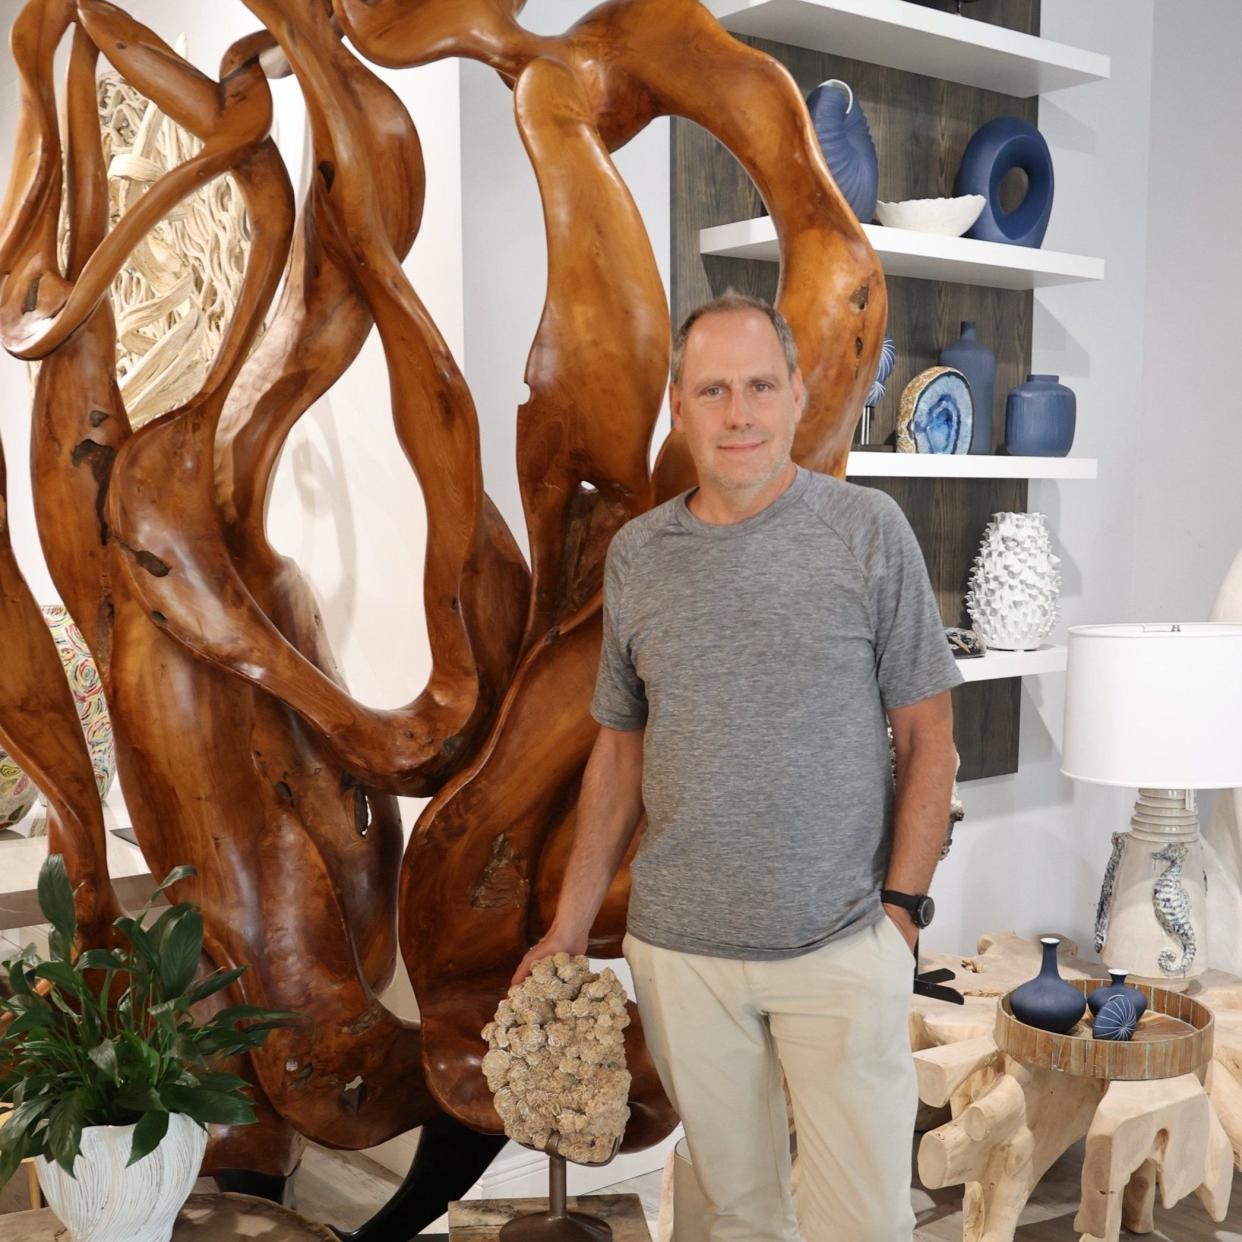 Cocoon Gallery owner Mitchell Siegel opened a location in Palm Beach in January. The business manufactures customized furniture and artwork from organic materials including wood and precious minerals.